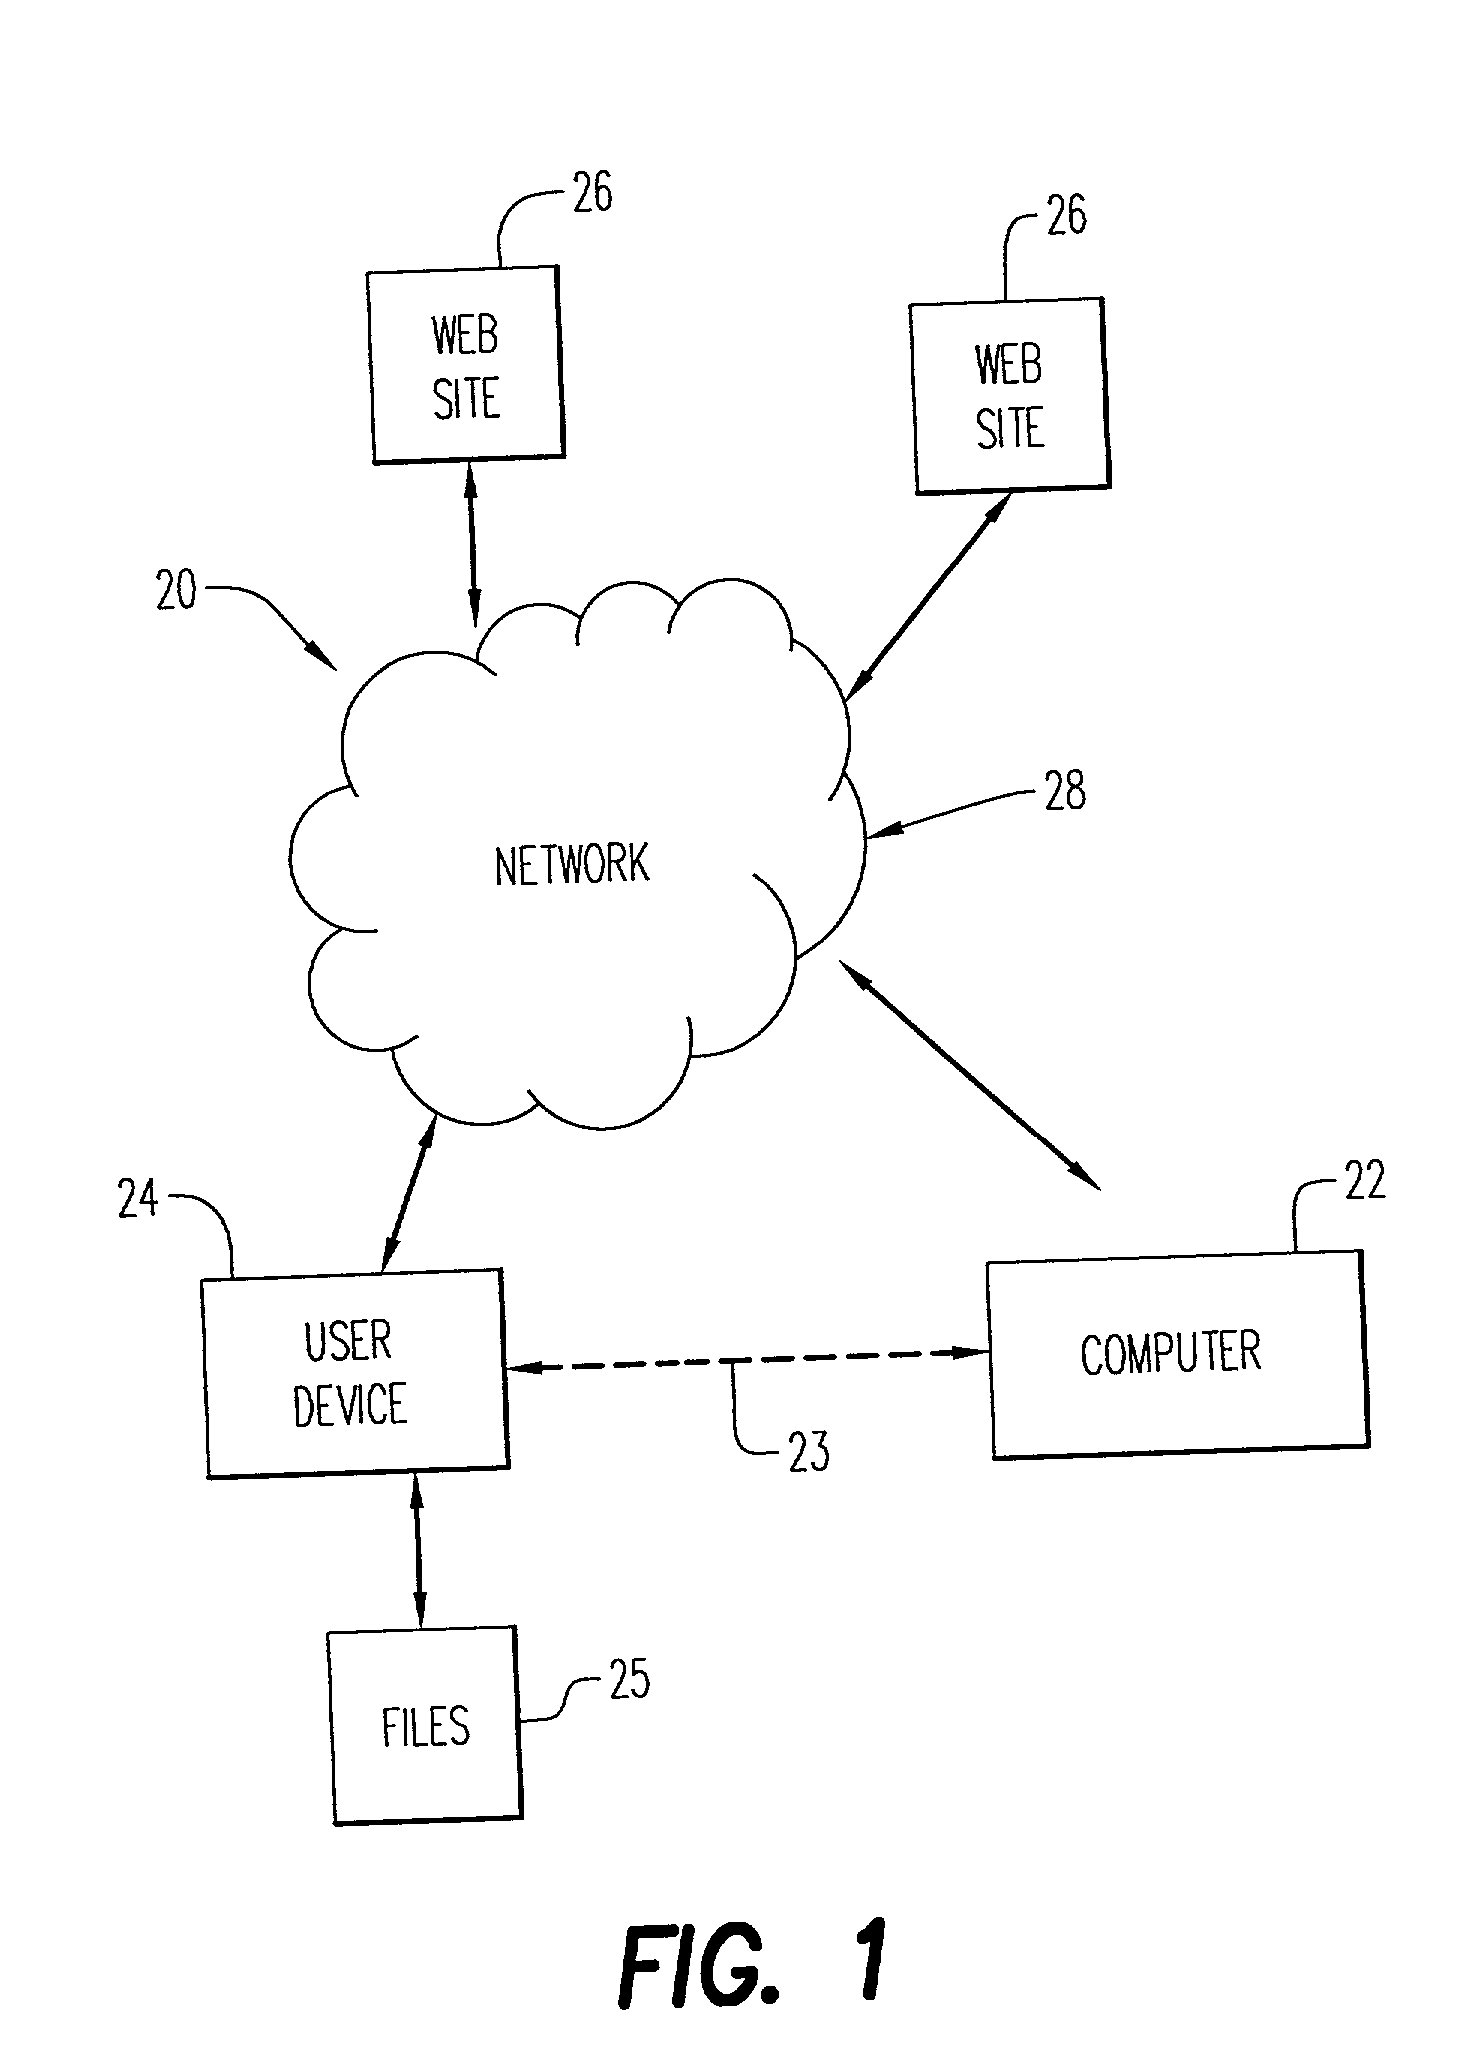 Method and system for creation of a spatially referenced multimedia relational database that can be transmitted among users or published to internet